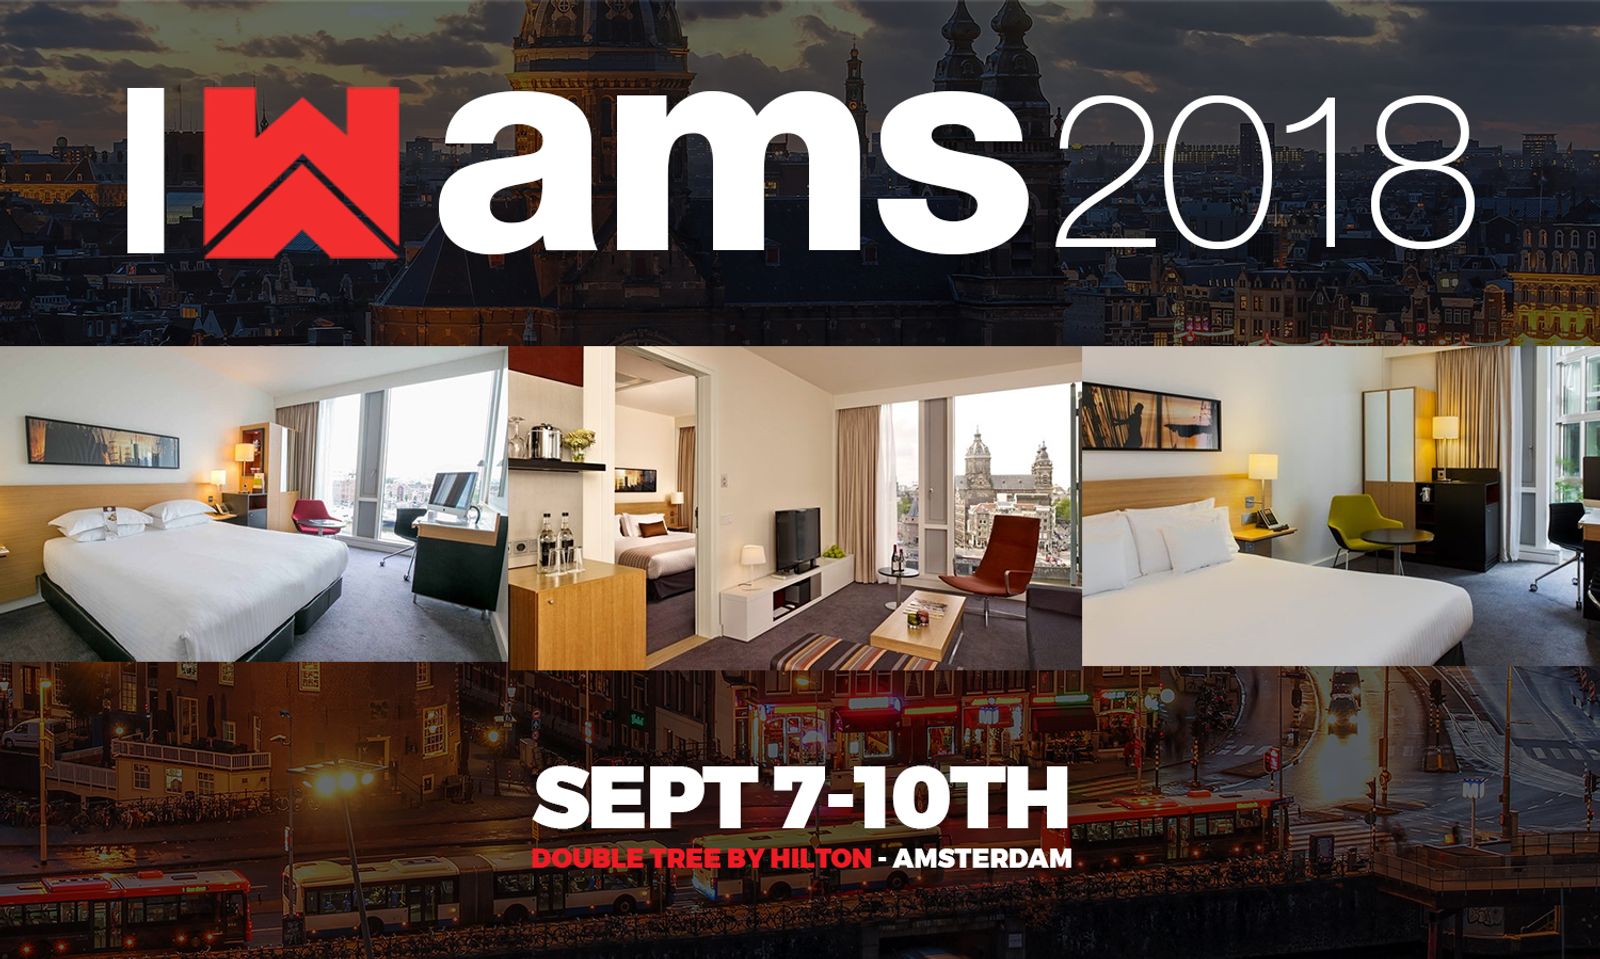 Hotel Block on Sale Now for Webmaster Access Amsterdam